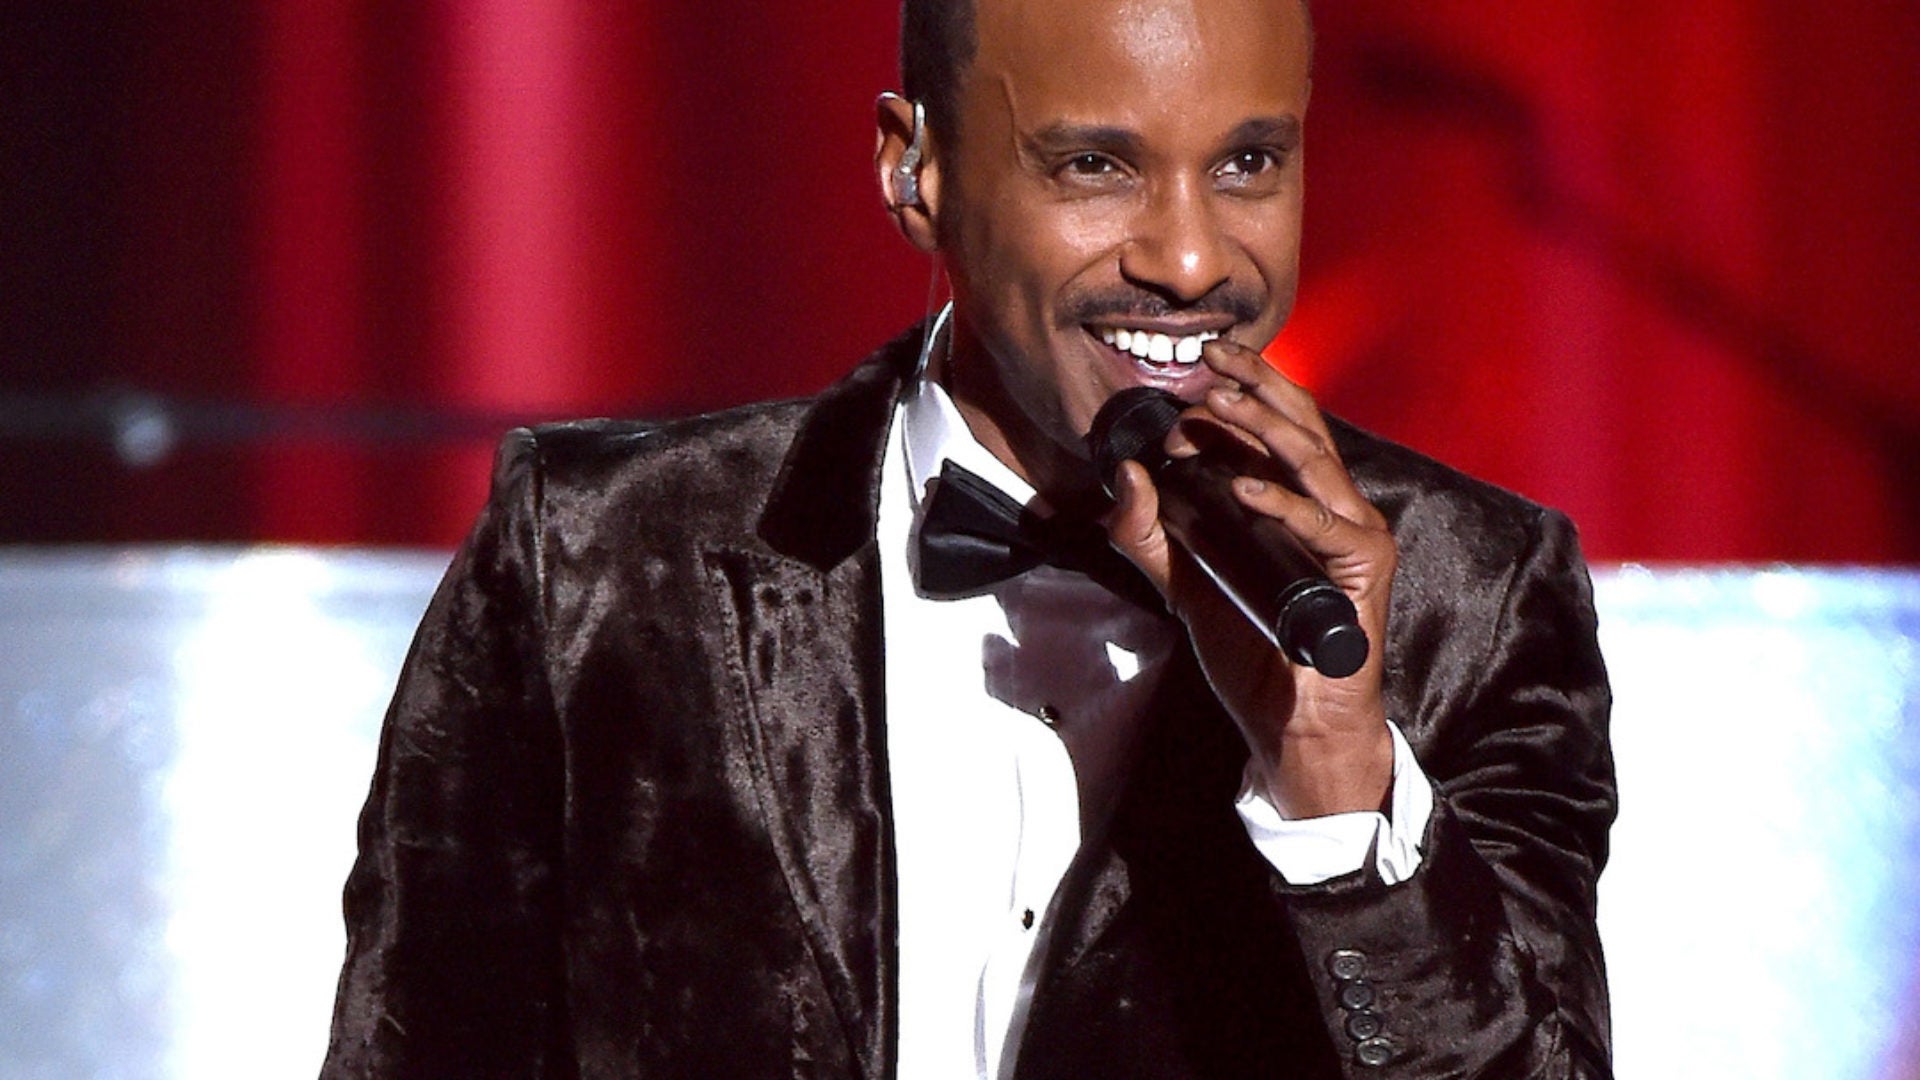 Tevin Campbell Is Ready To Release New Music After Hiatus